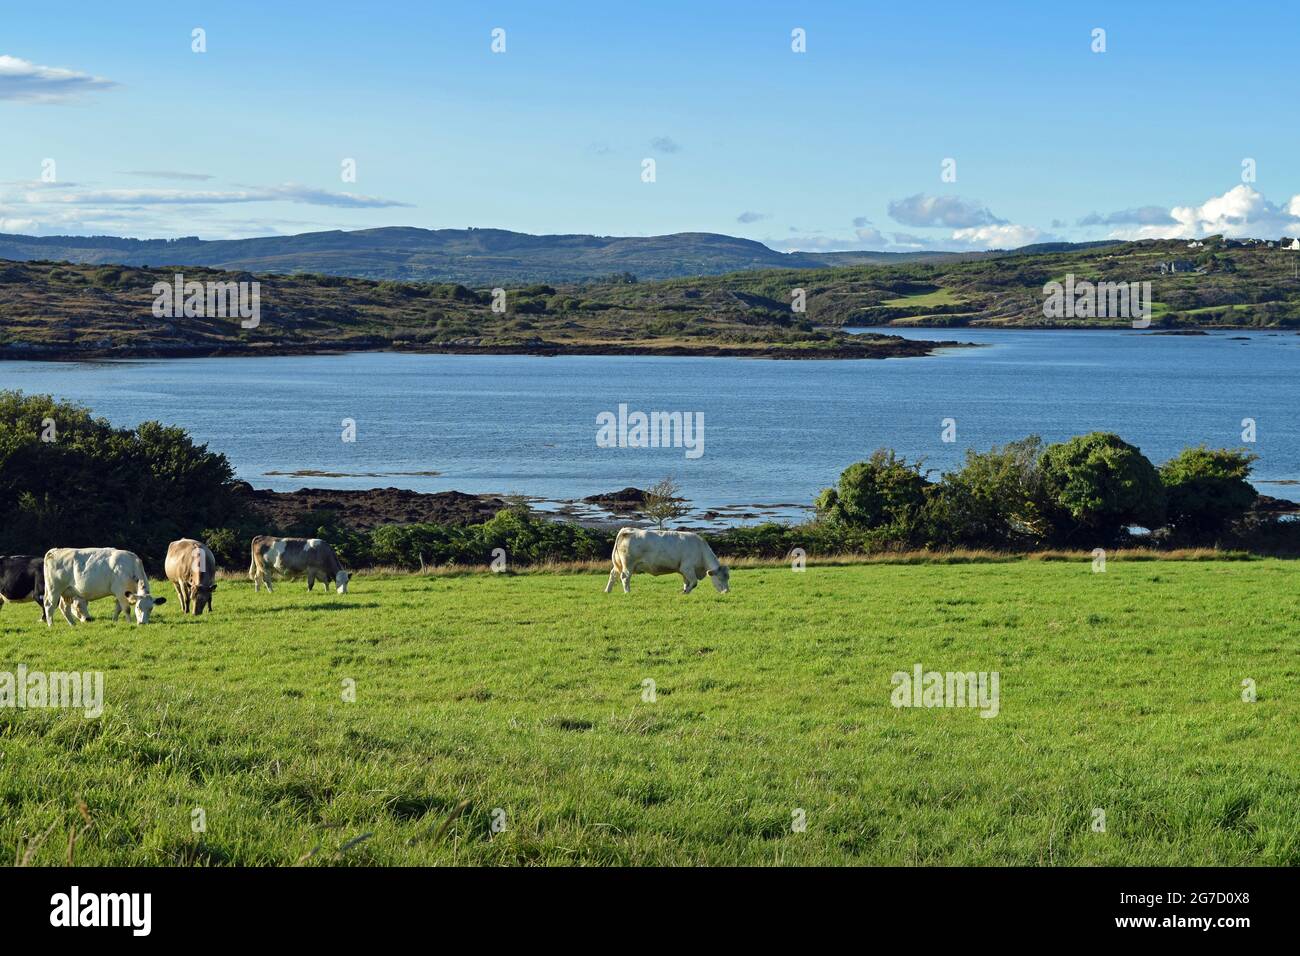 Cows in a field over looking Roaring Water Bay, West Cork, Ireland. Stock Photo